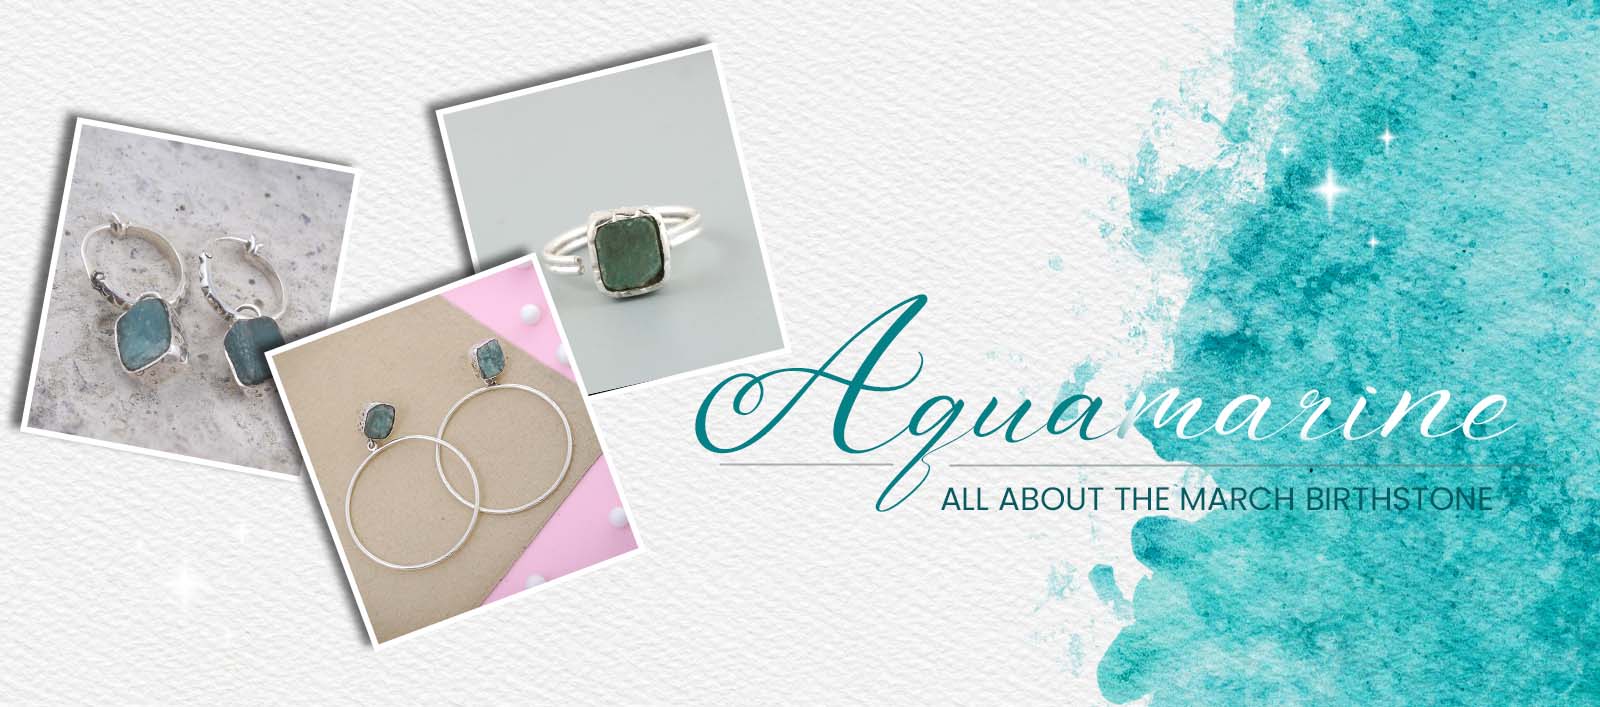 All About the March Birthstone | Aquamarine